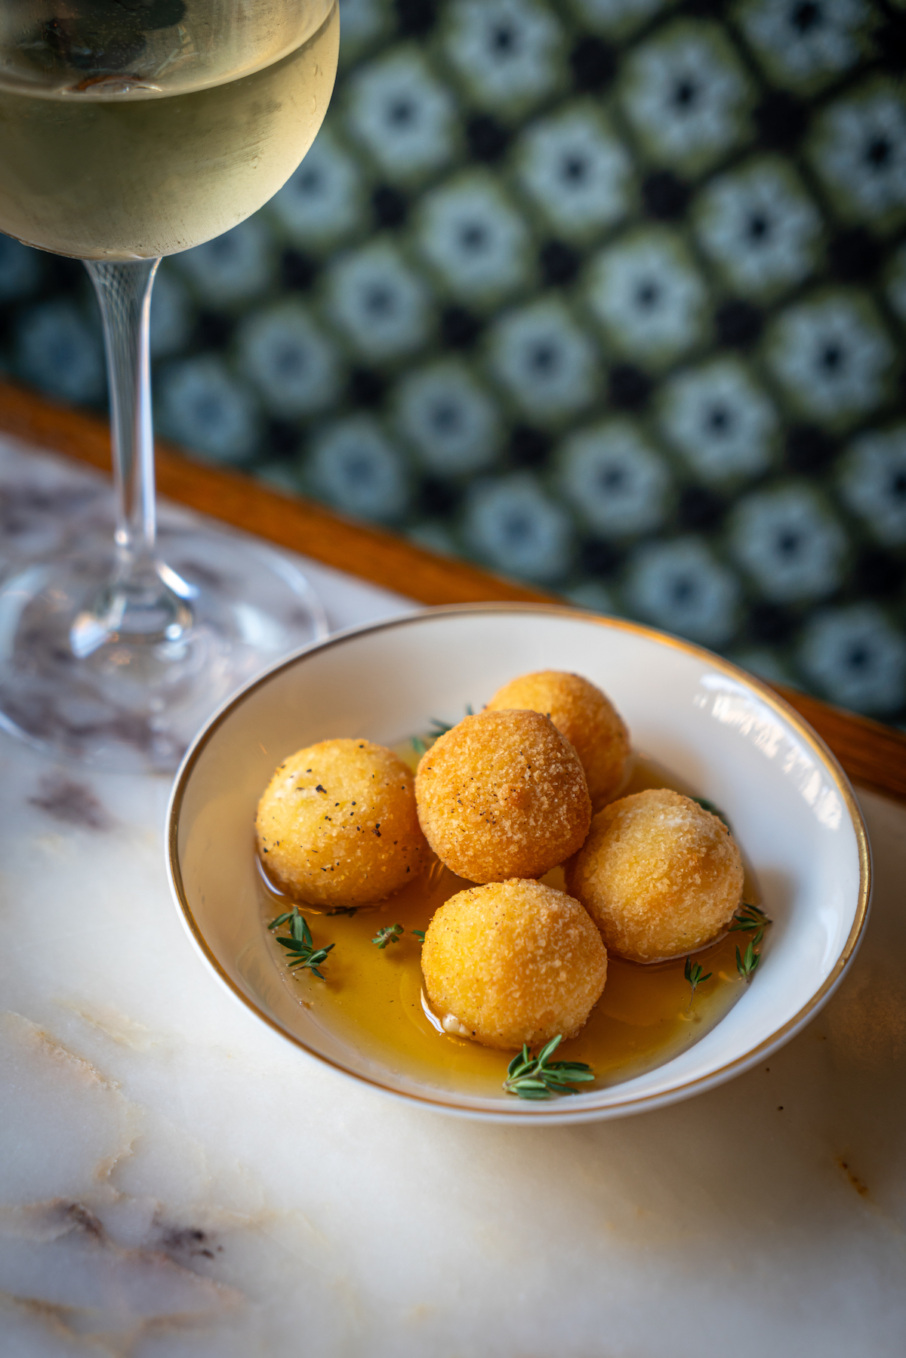 Goat cheese croquettes from Café Chelsea